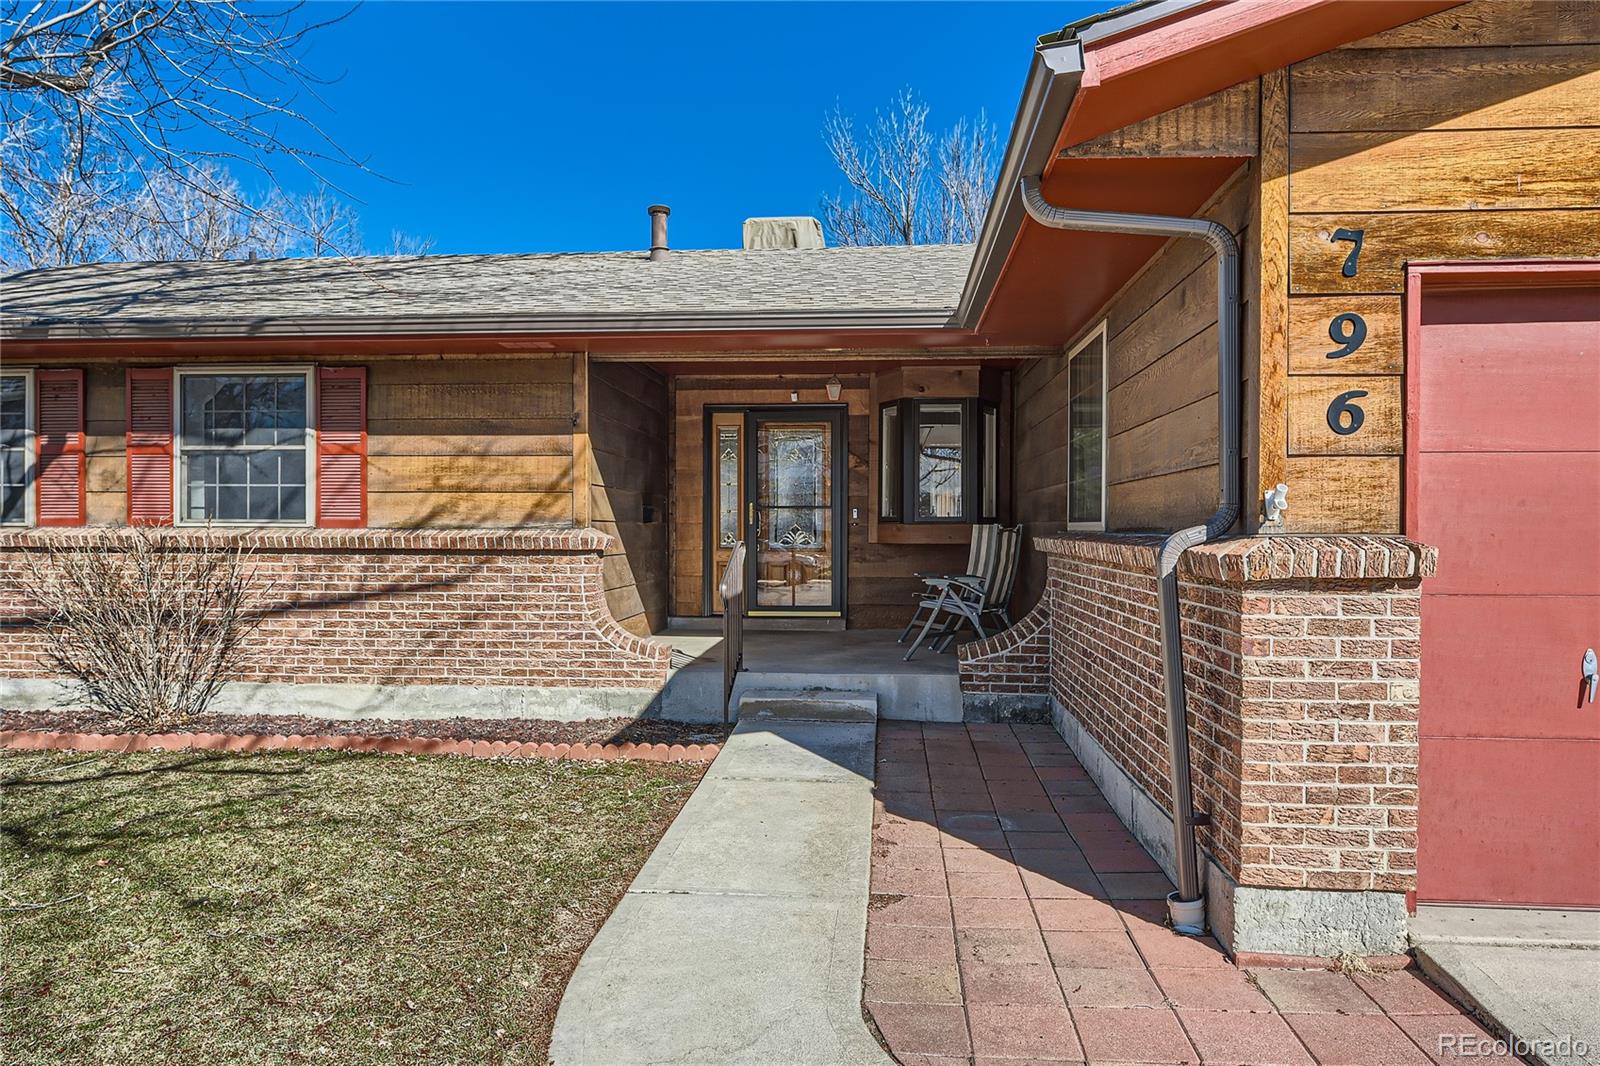 Report Image for 796 S Moore Street,Lakewood, Colorado